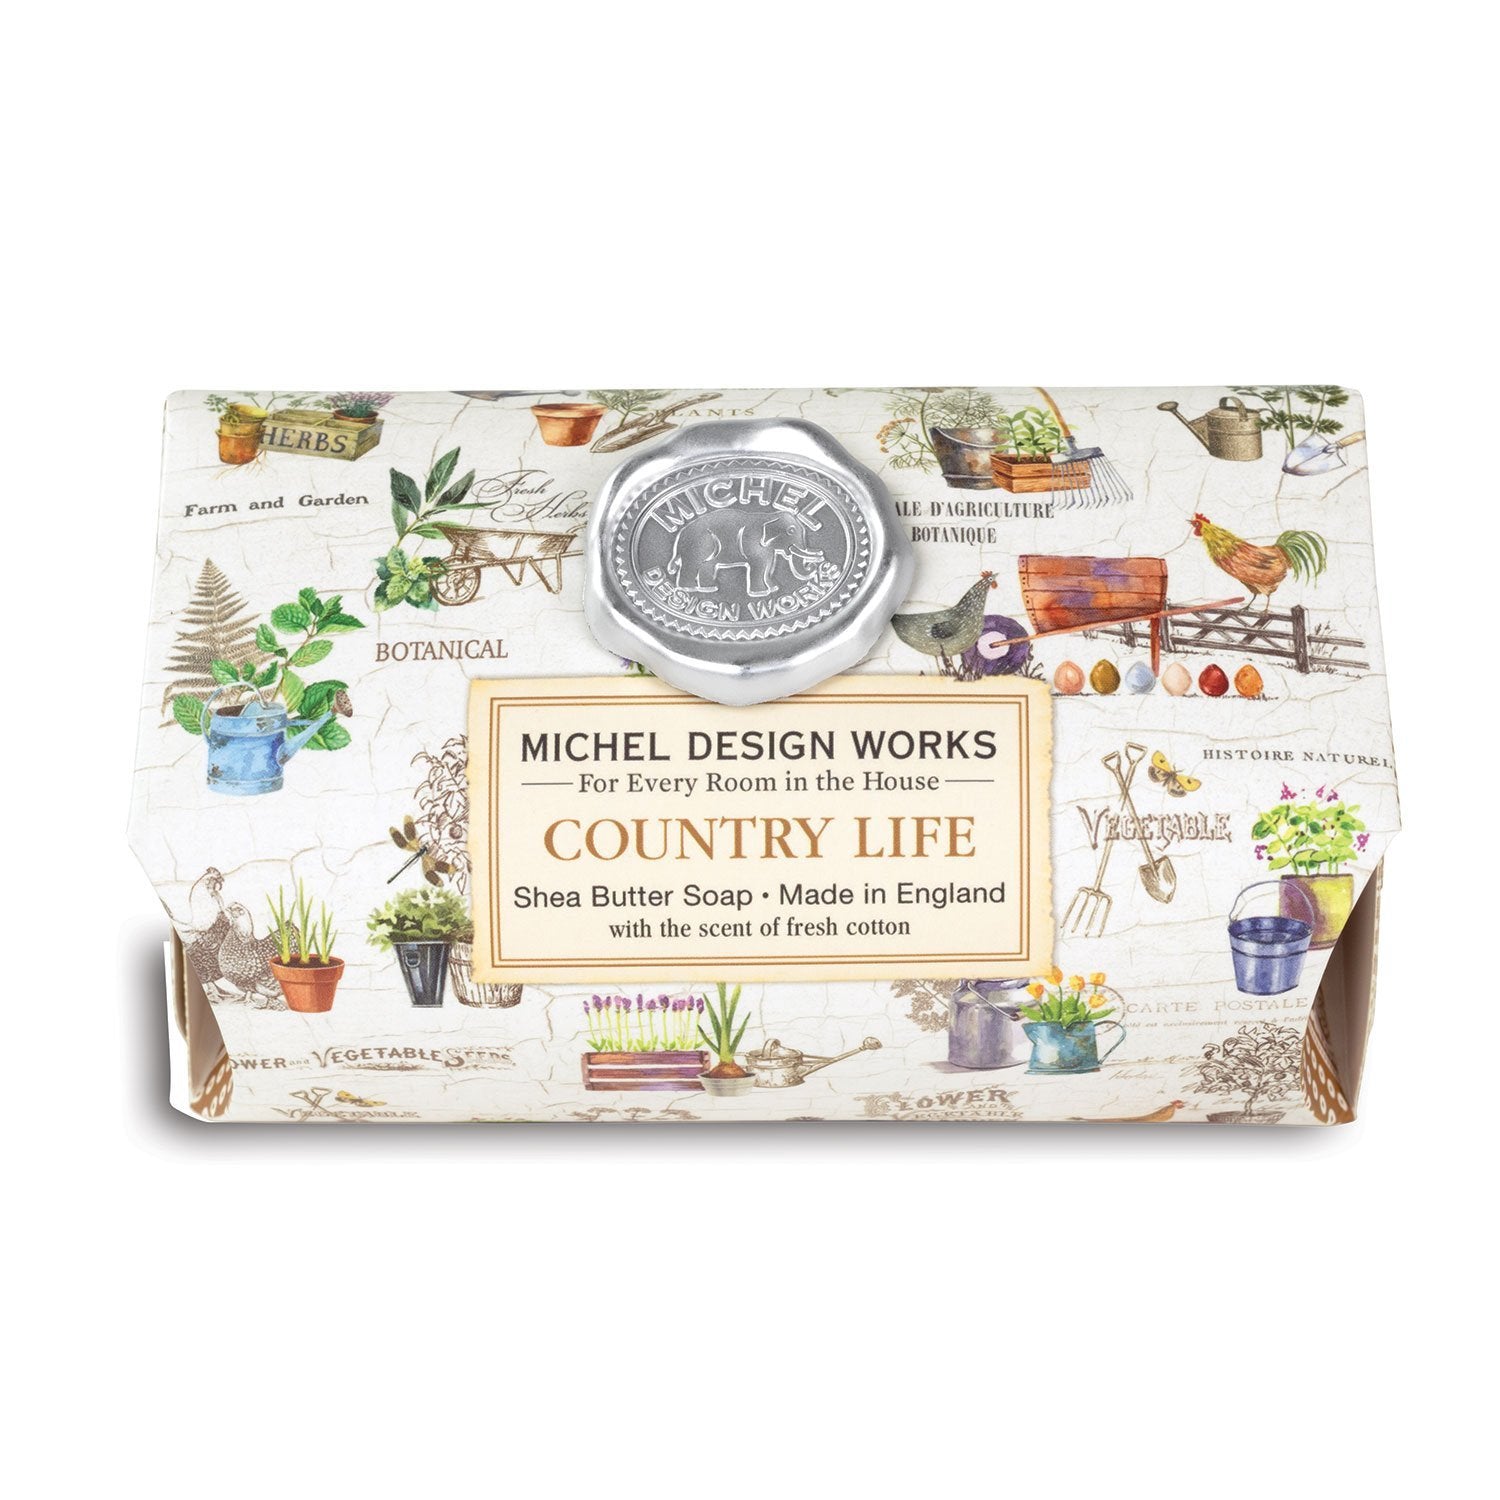 Michel Design Works Country Life Large Bath Soap Bar